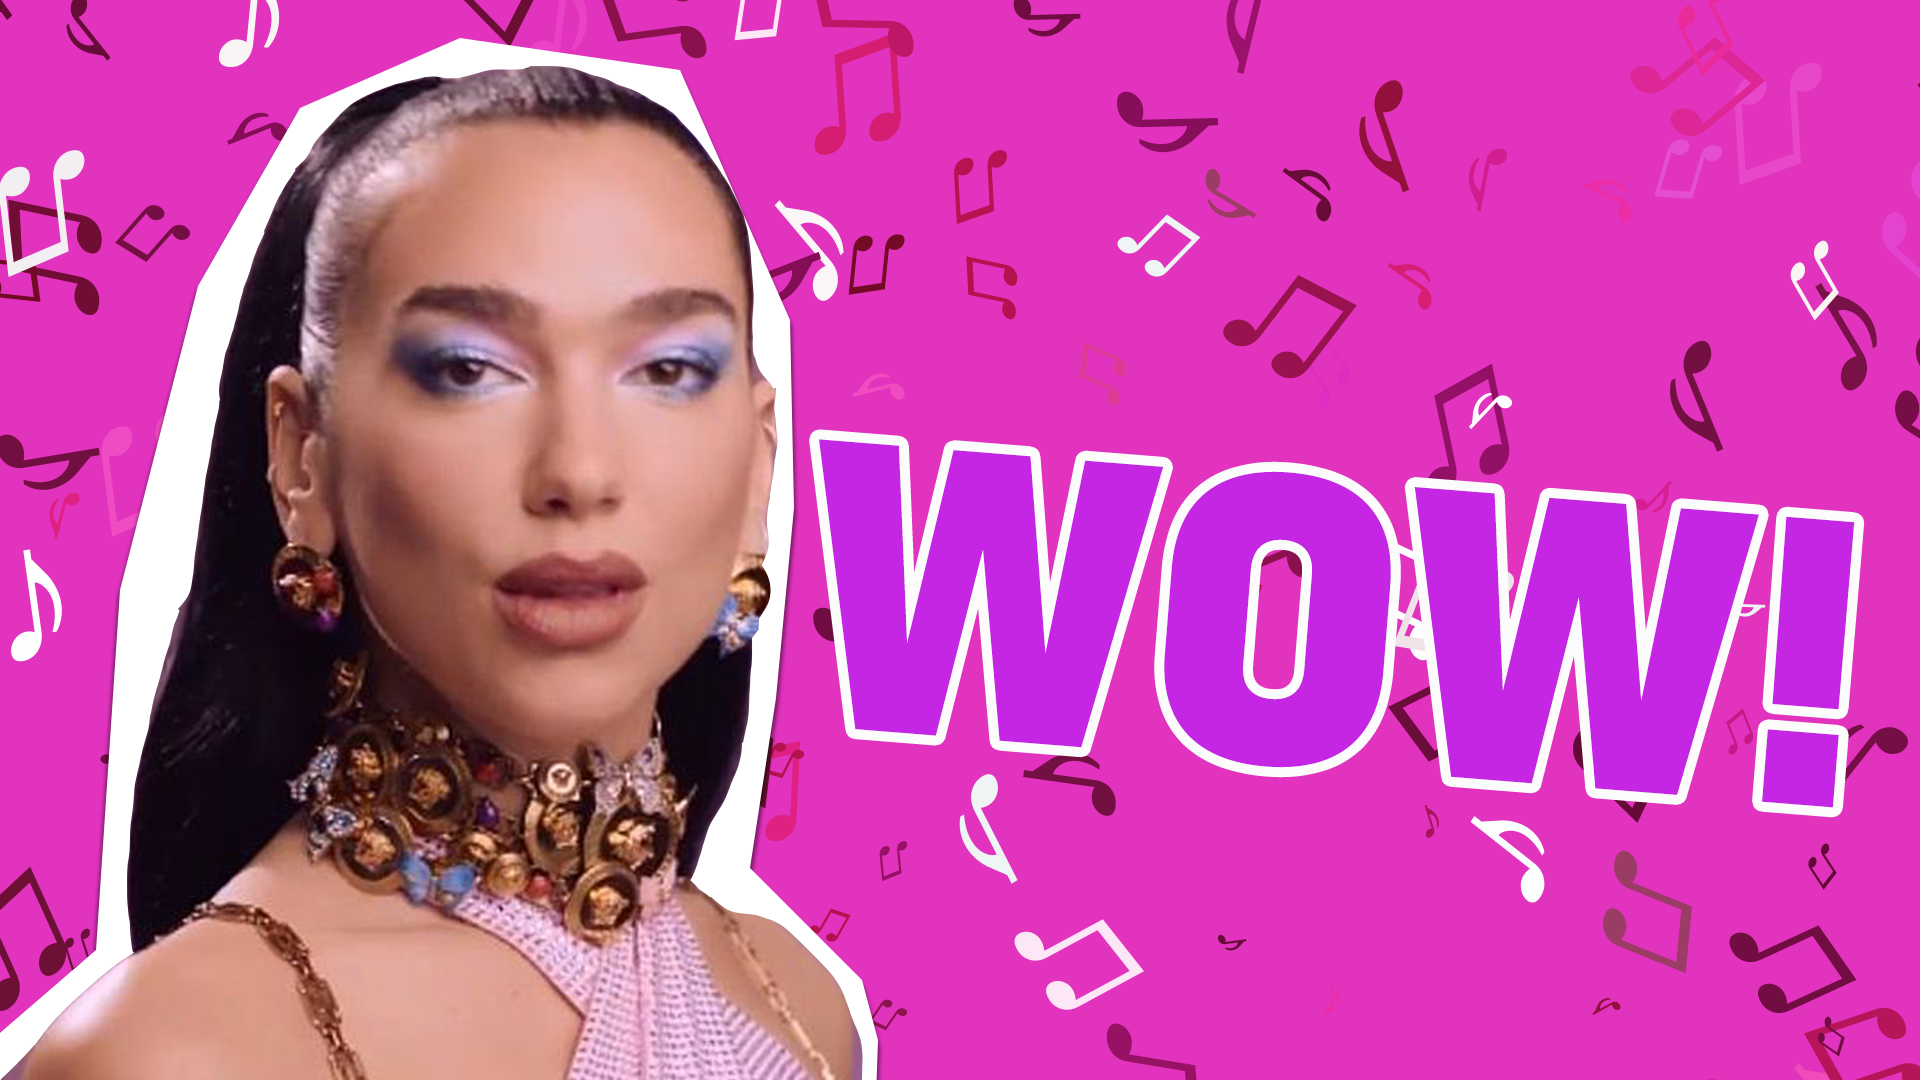 Incredible! Sublime, even! You got 100% on this Barbie Soundtrack quiz, which means you are well and truly ready to dance the night away with Barbie and crew!